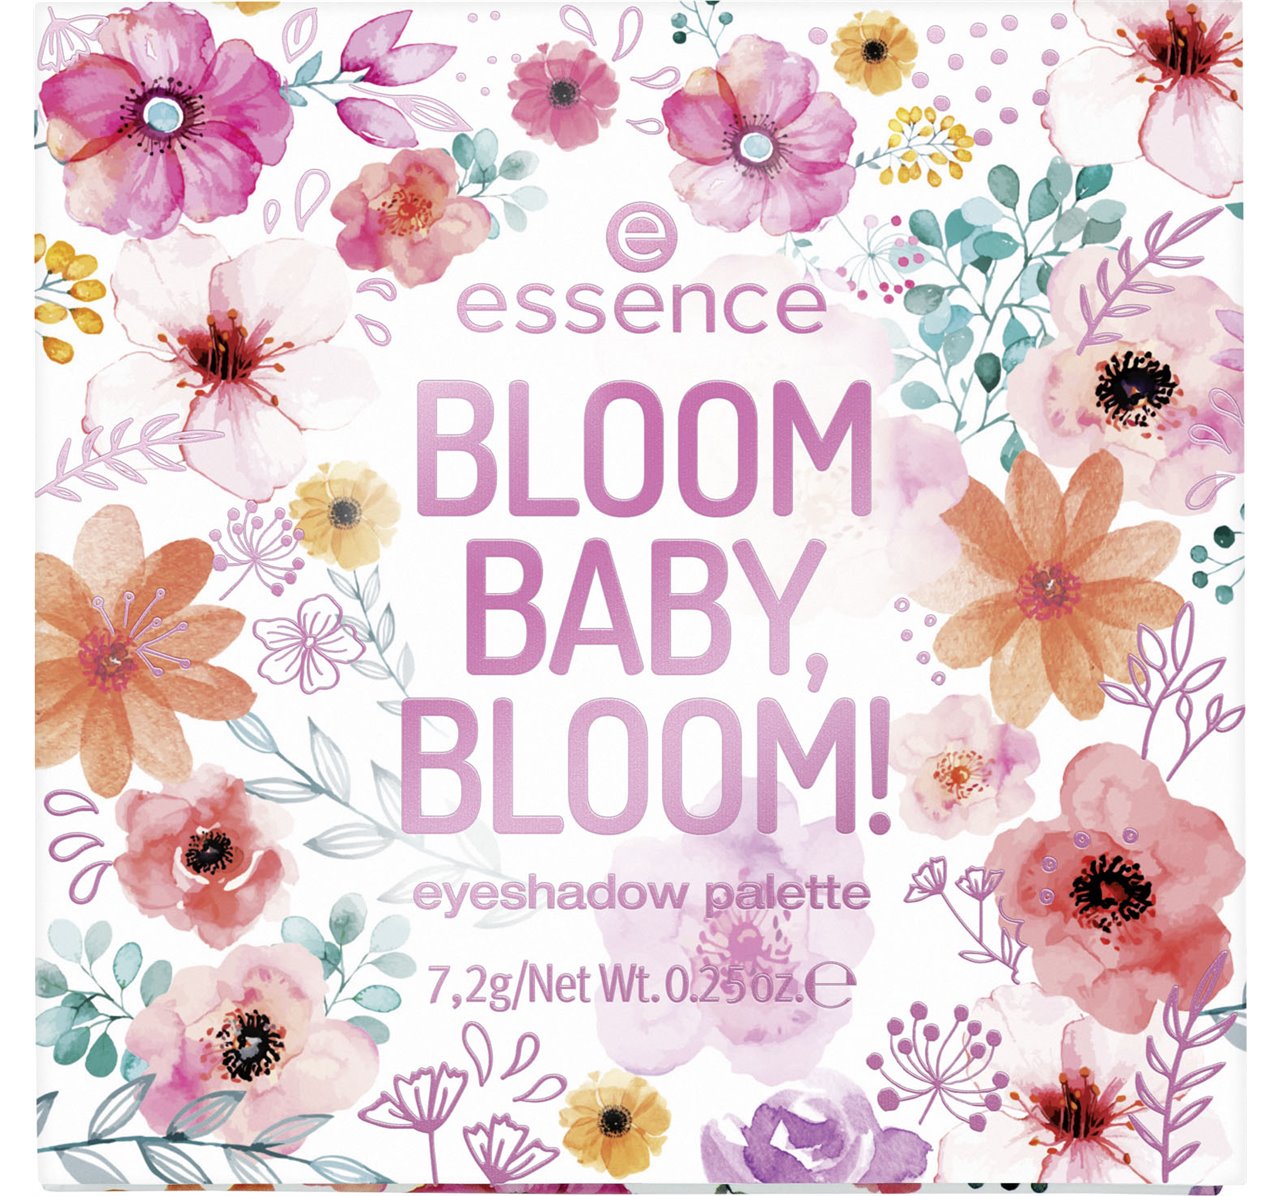 BABY, BLOOM Poppy-ng 01 palette BLOOM! essence eyeshadow Colours